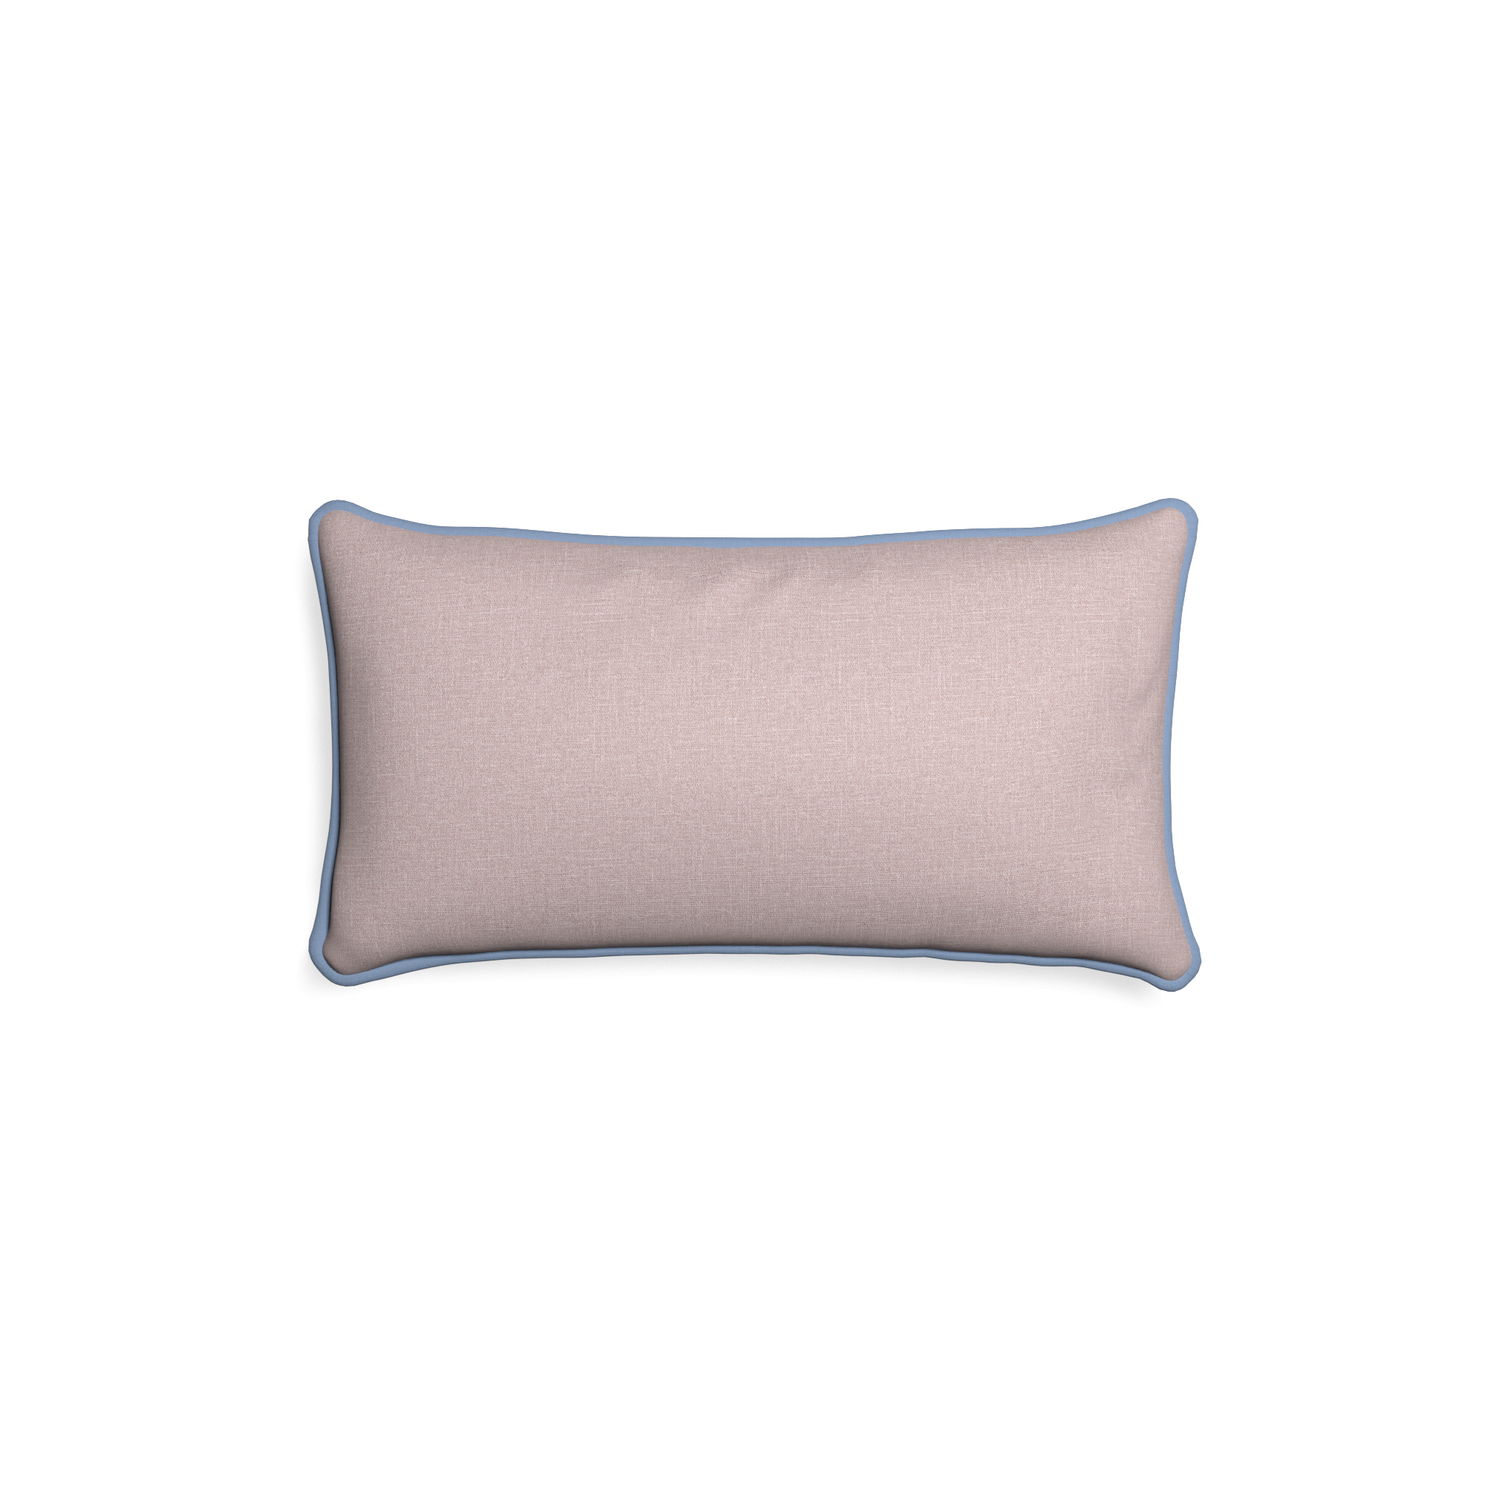 Petite-lumbar orchid custom mauve pinkpillow with sky piping on white background